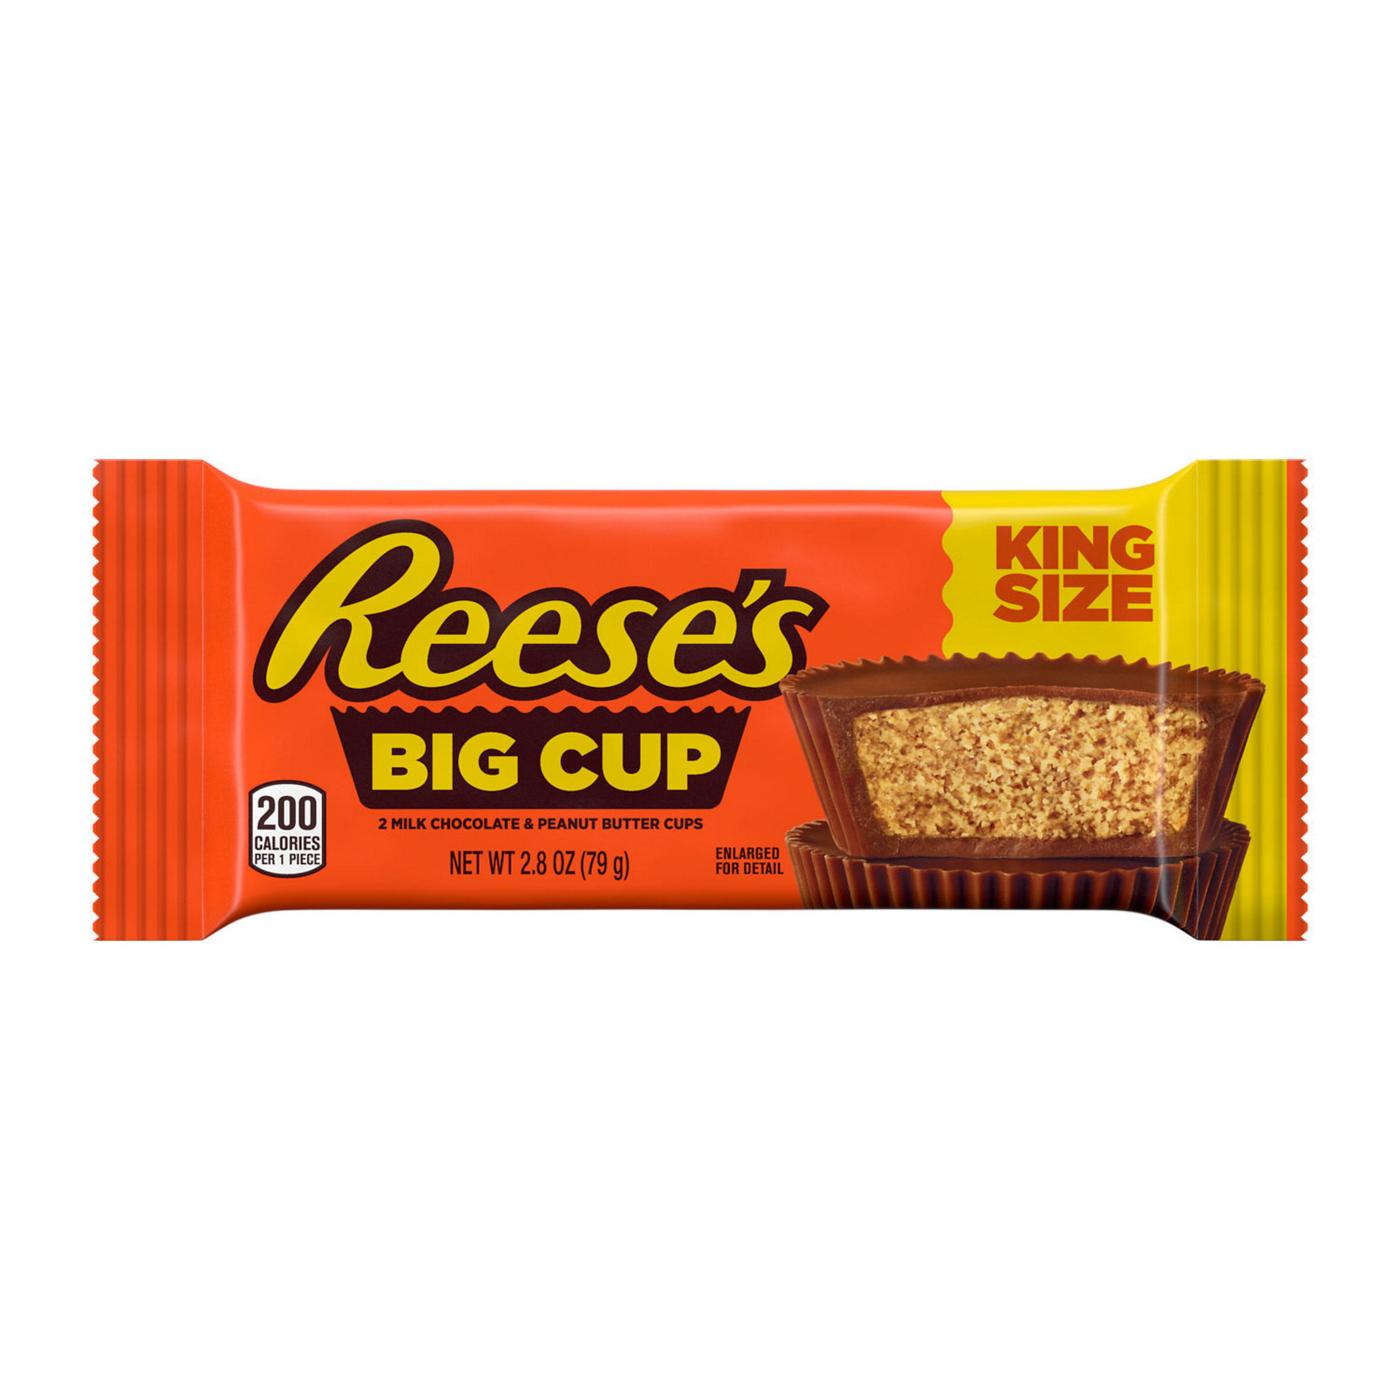 Reese's Big Cup Milk Chocolate Peanut Butter Candy - King Size; image 1 of 5